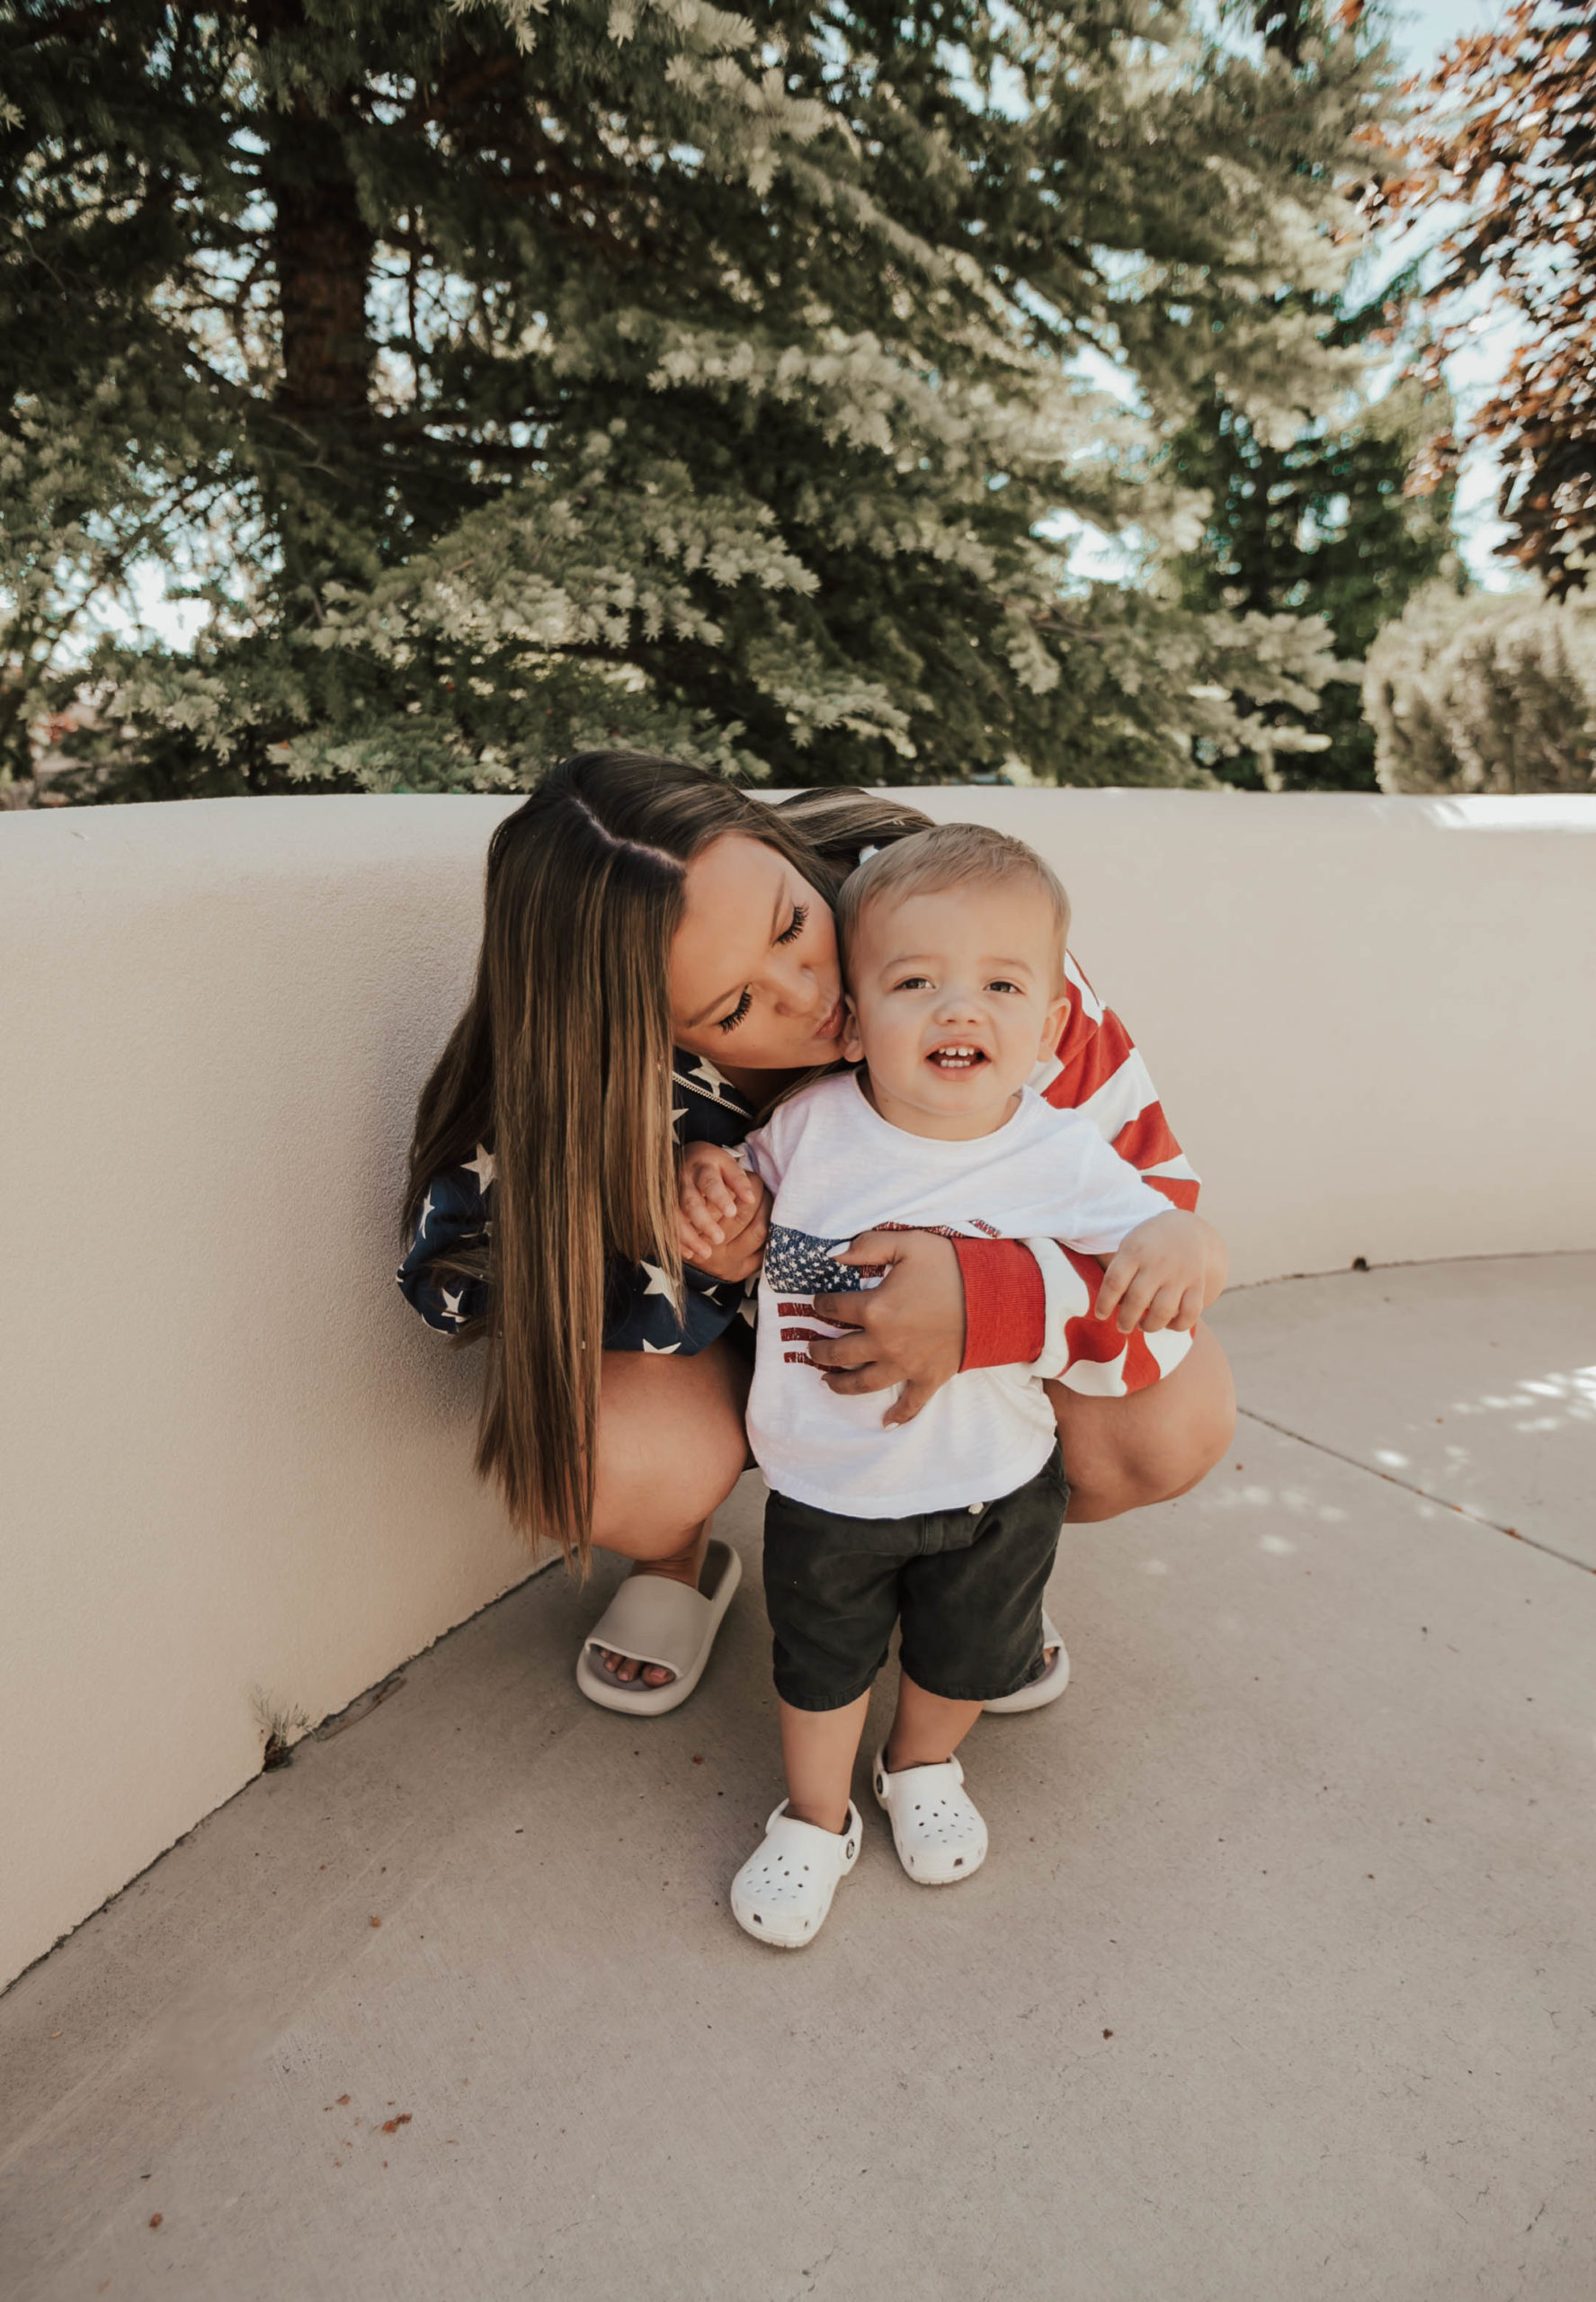 Reno blogger, Ashley Zeal Hurd, from The Ashley and Emily Blog shares her favorite Fourth of July Outfit Ideas for you and the kids!